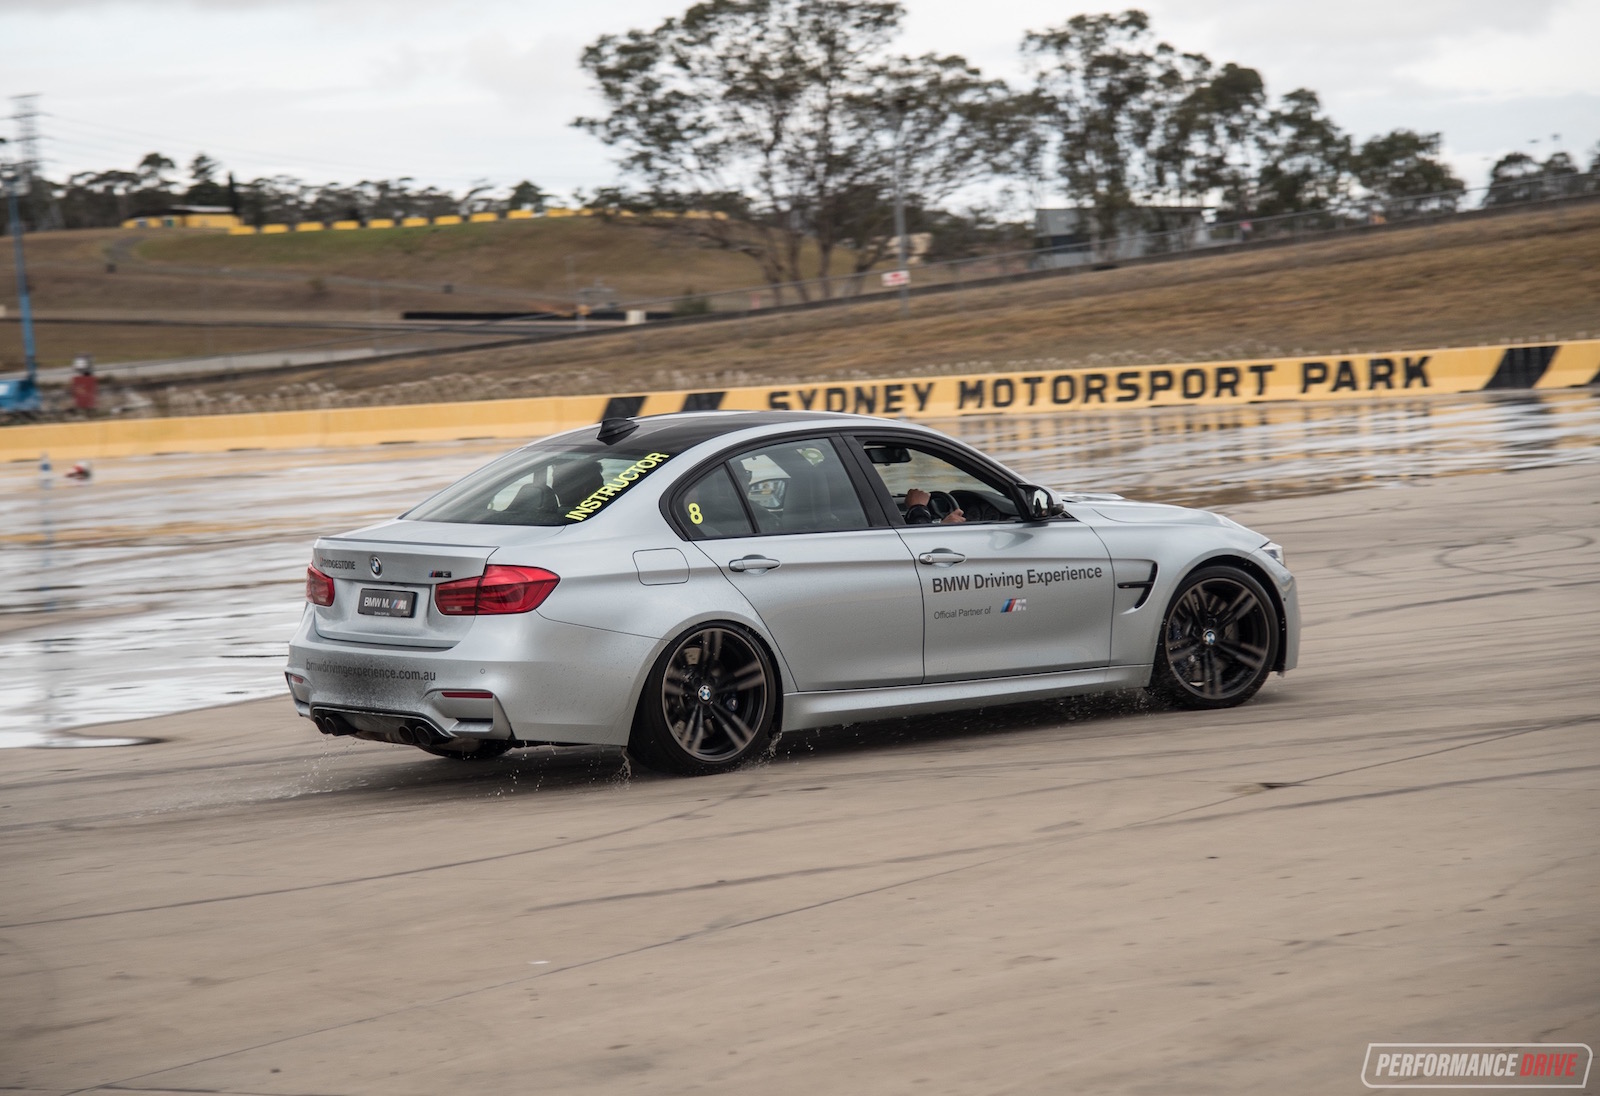 BMW Driving Experience at Sydney Motorsport Park